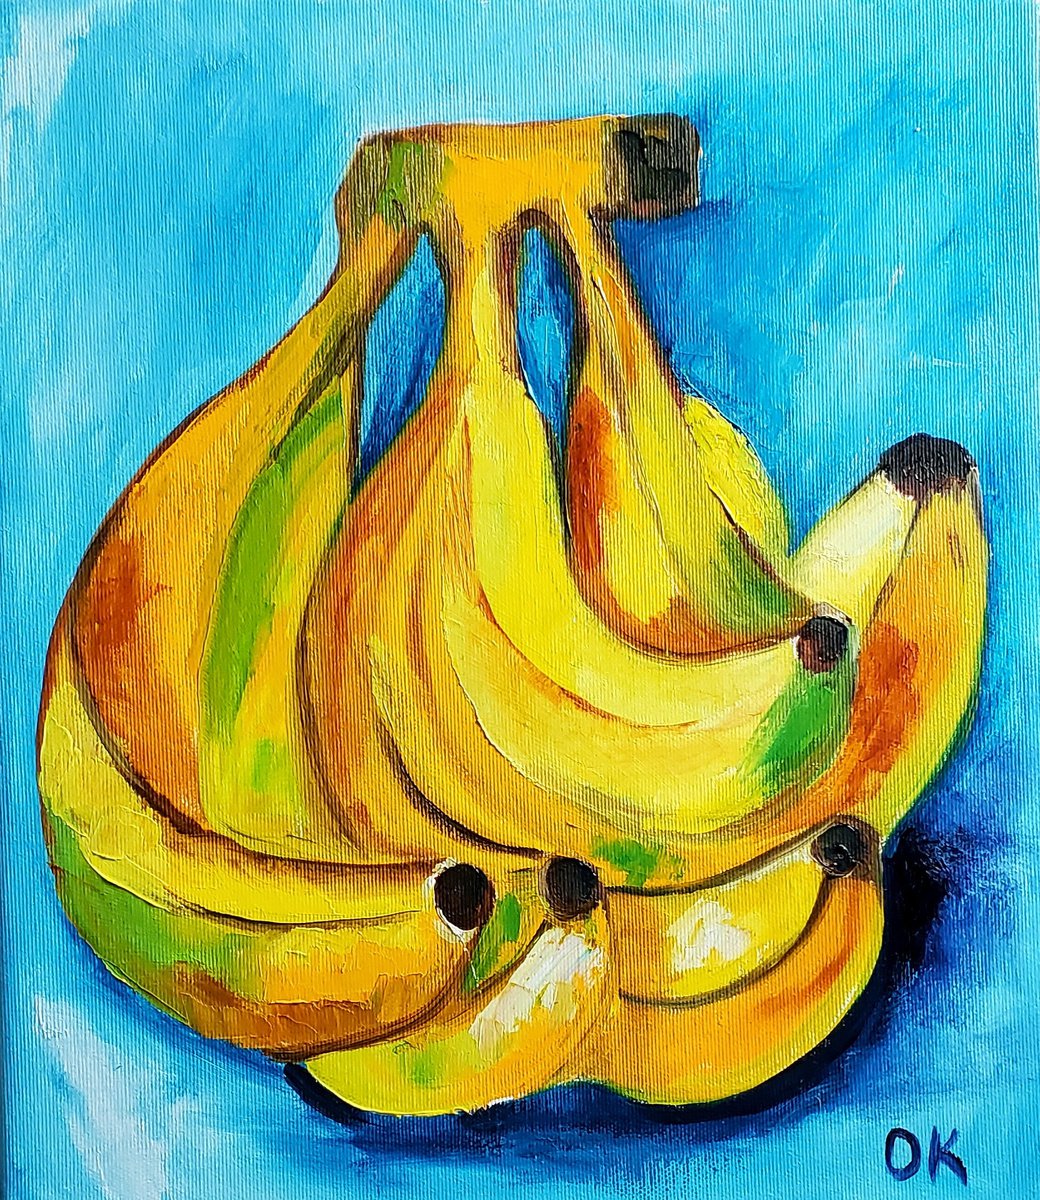 Bananas on turquoise Still life. Palette knife painting on linen canvas by Olga Koval